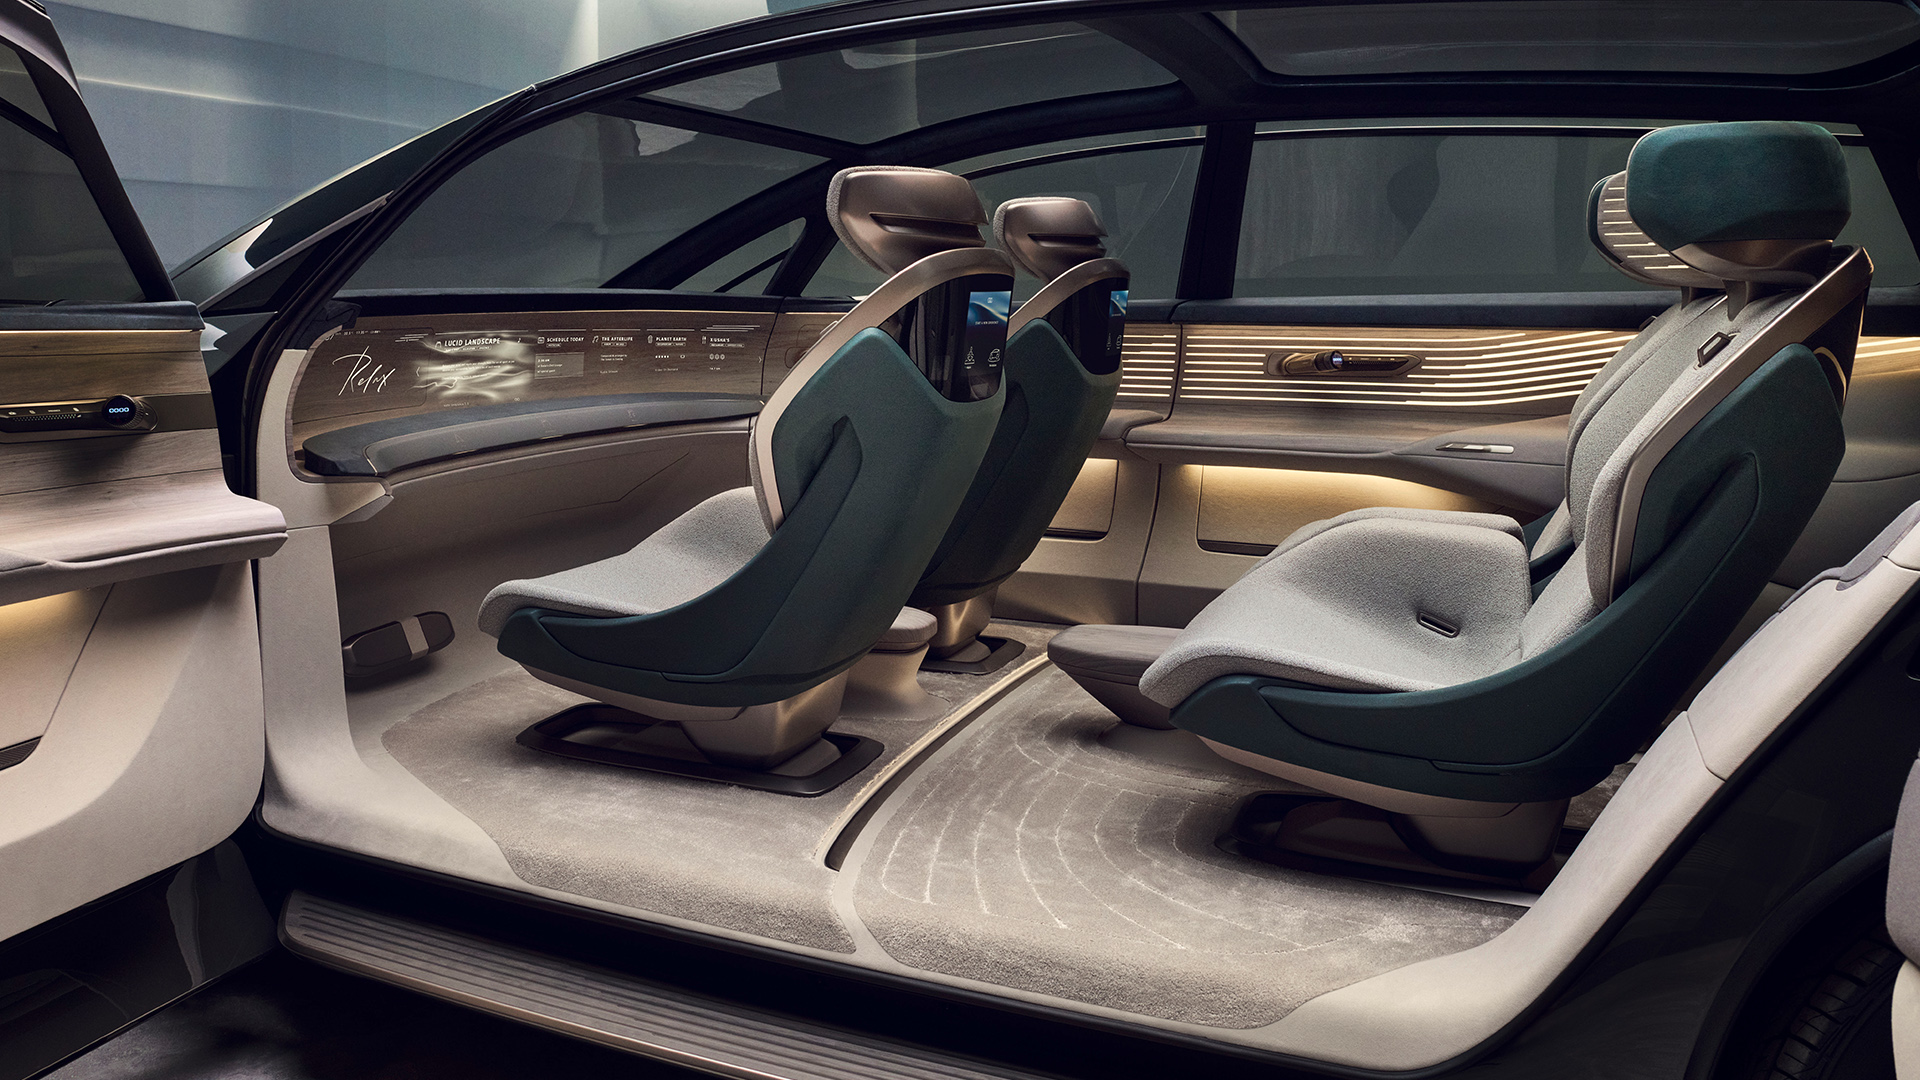 The interior of the Audi urbansphere concept seen through the open doors.